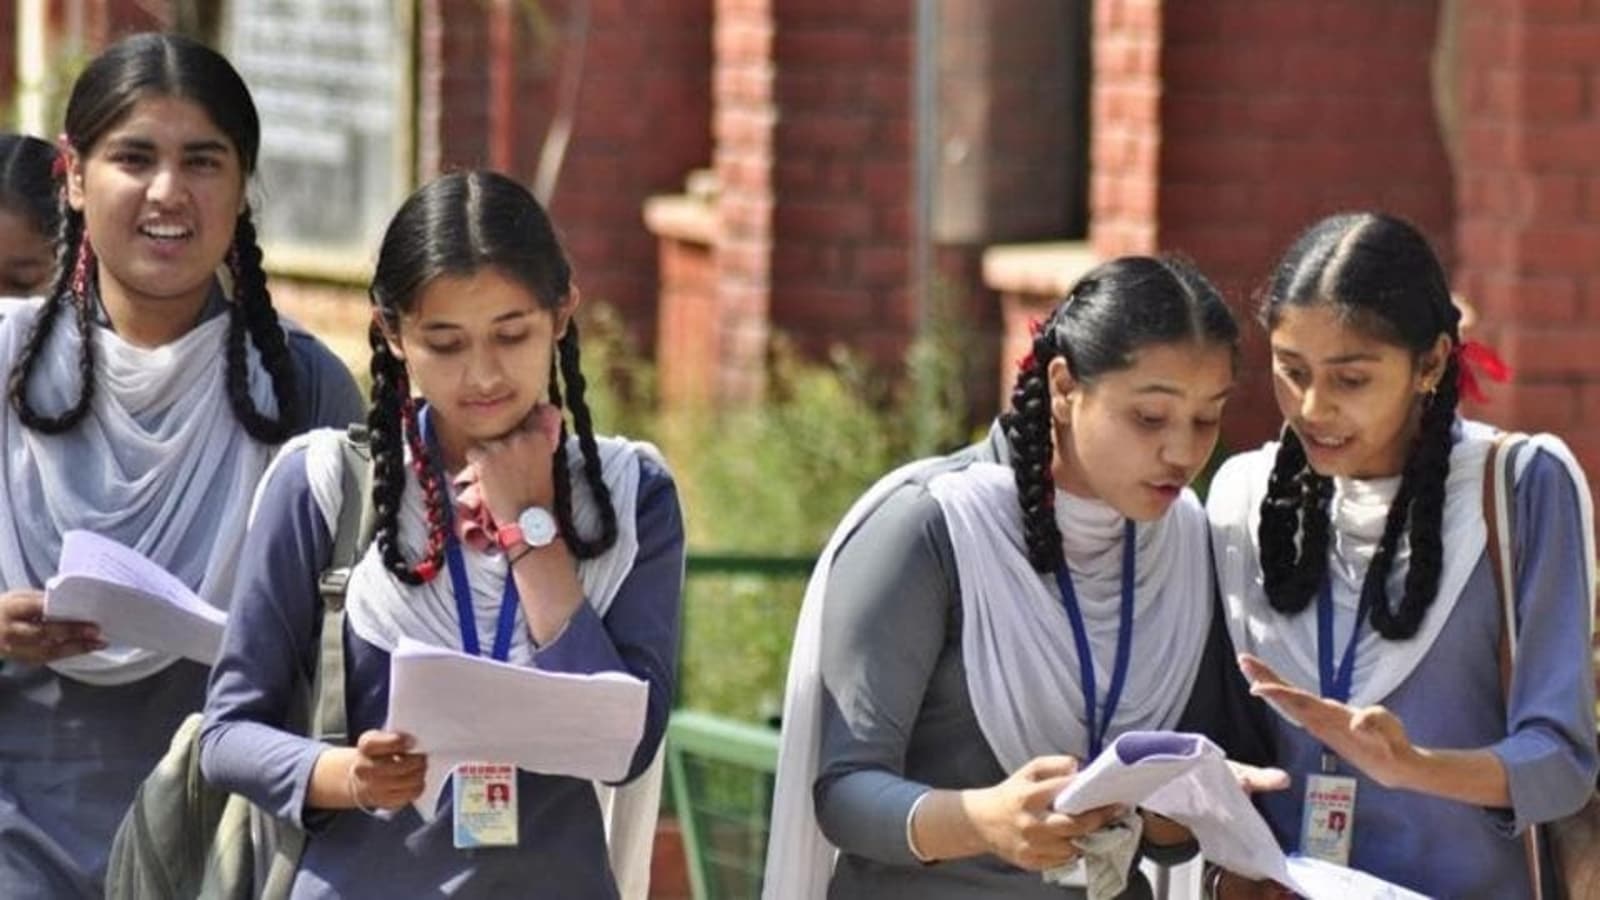 BSEB Bihar Board 12th Result 2022 LIVE: BSEB result to be out tomorrow